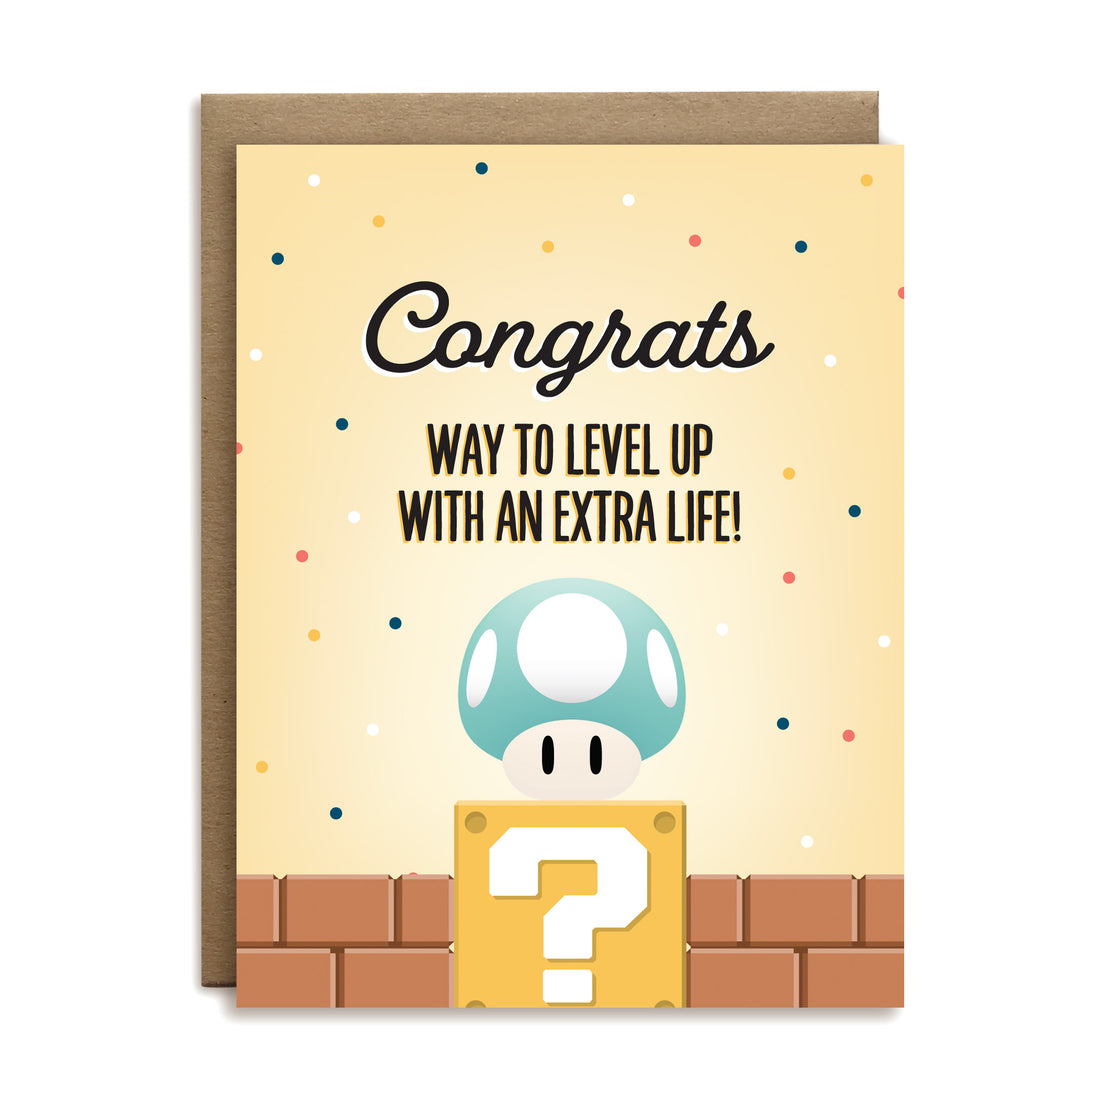 Congrats, way to level up with an extra life Mario Bros. baby greeting card by I&